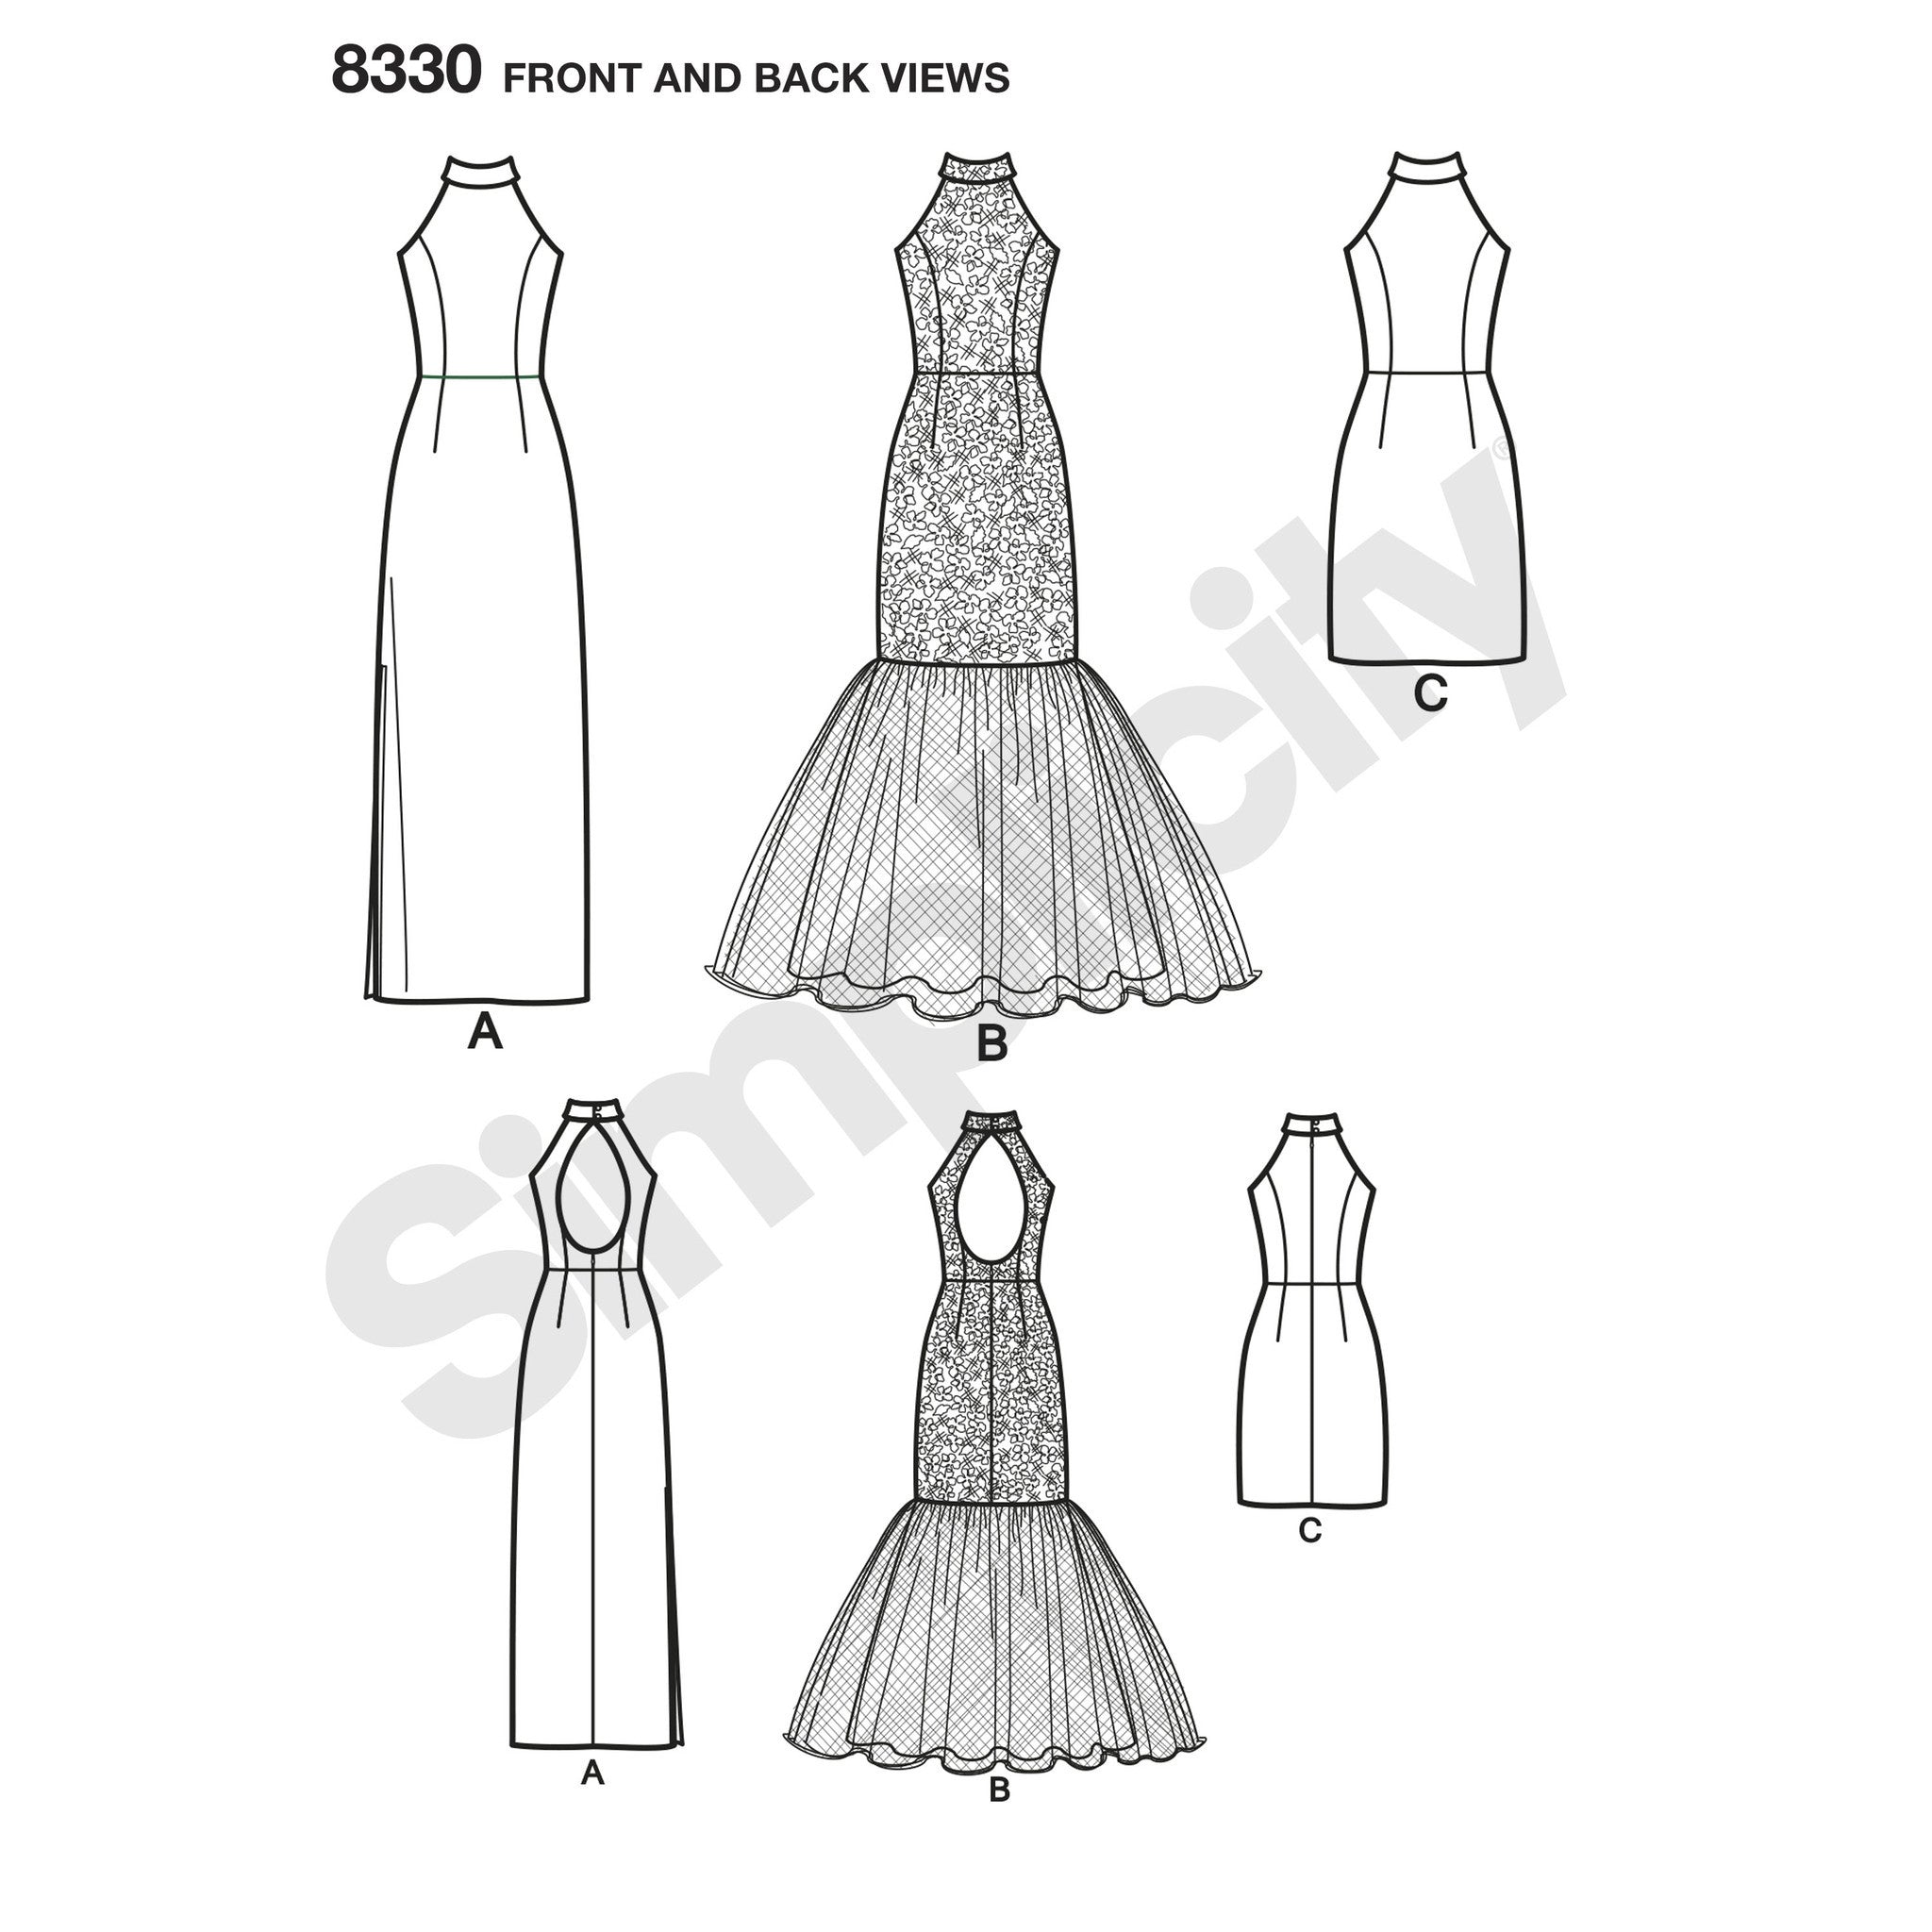 Simplicity Pattern 8330 misses dress with skirt and back variations from Jaycotts Sewing Supplies